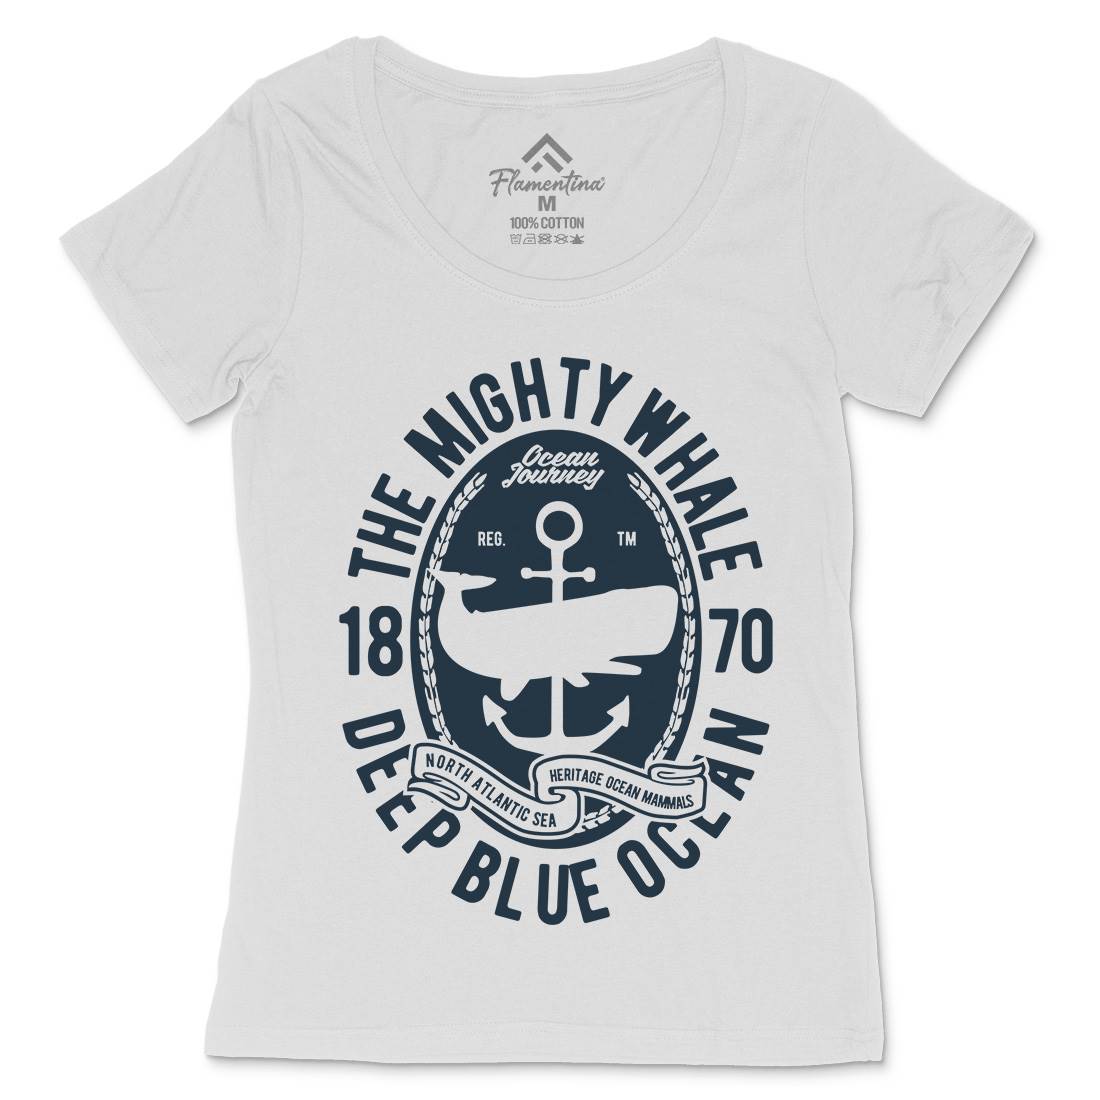 The Mighty Whale Womens Scoop Neck T-Shirt Navy B466